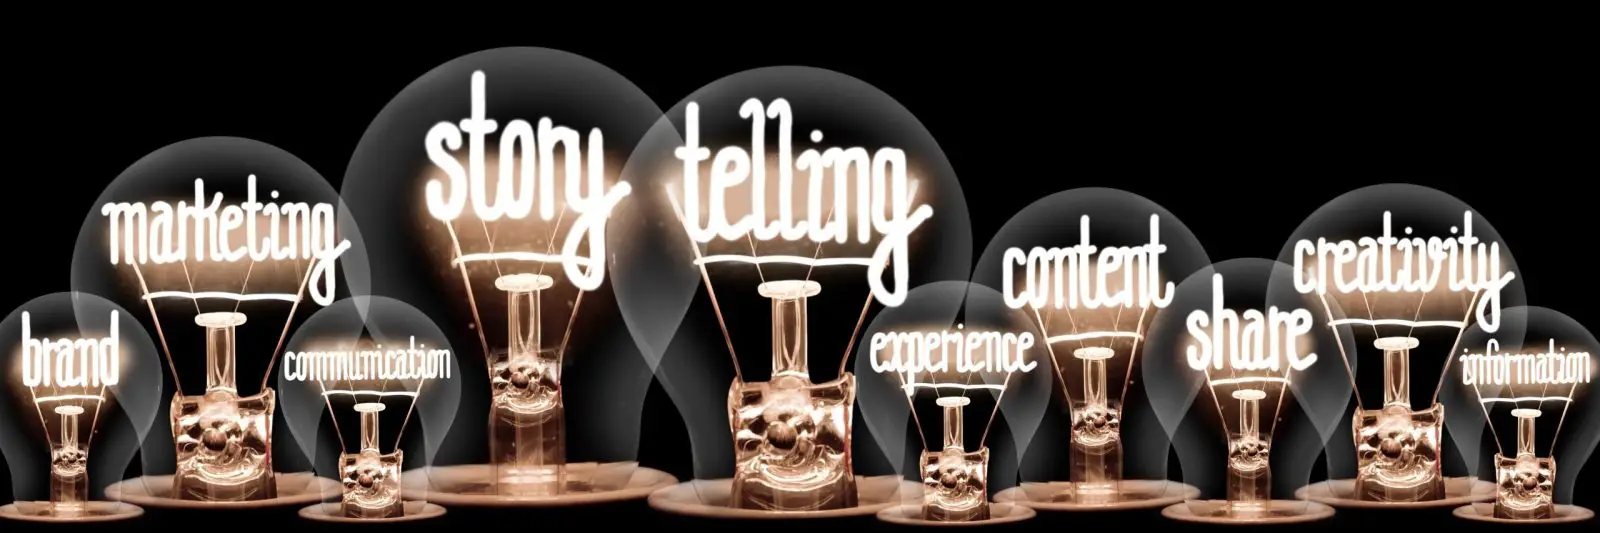 Illuminated light bulbs display words related to content marketing in their filaments.